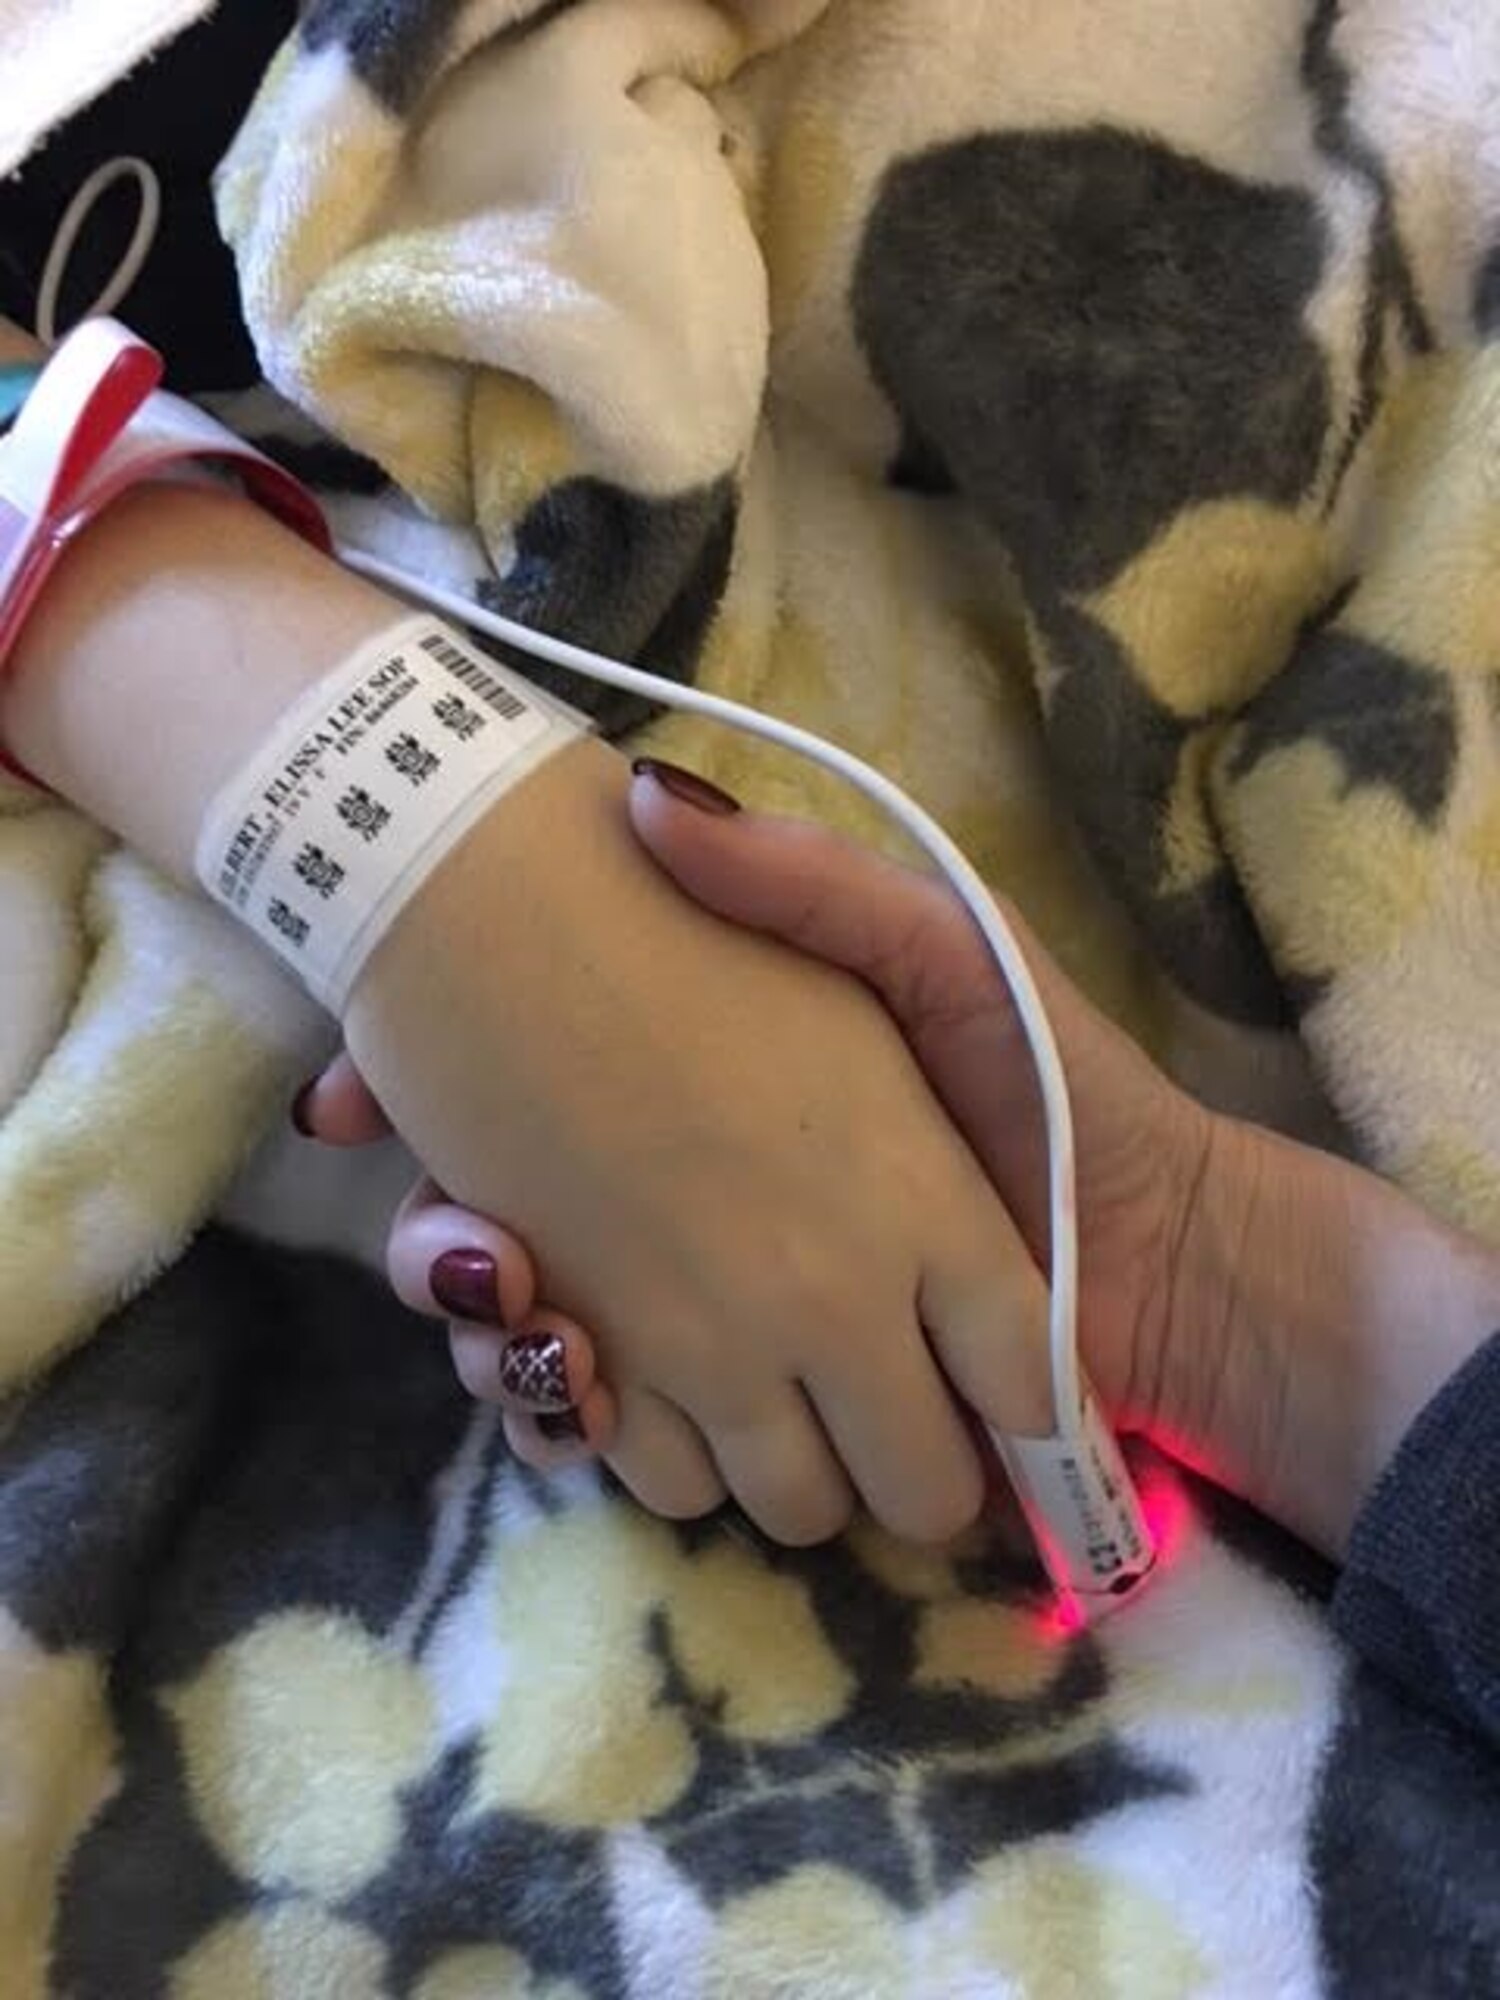 Master Sgt. Heidi White holds her 19-year-old daughter Elissa's hand while her daughter recovers rom surgery December 7, 2016 at Florida Hospital, Orlando. Elissa White had surgery to donate one of her kidneys to her father, Retired Master Sgt. Derrell White who had been facing the harsh reality that he may not make it to Christmas Day due to a chronic medical condition that was worsening. Fate decided he would get the perfect gift this year - life. (Courtesy photo)